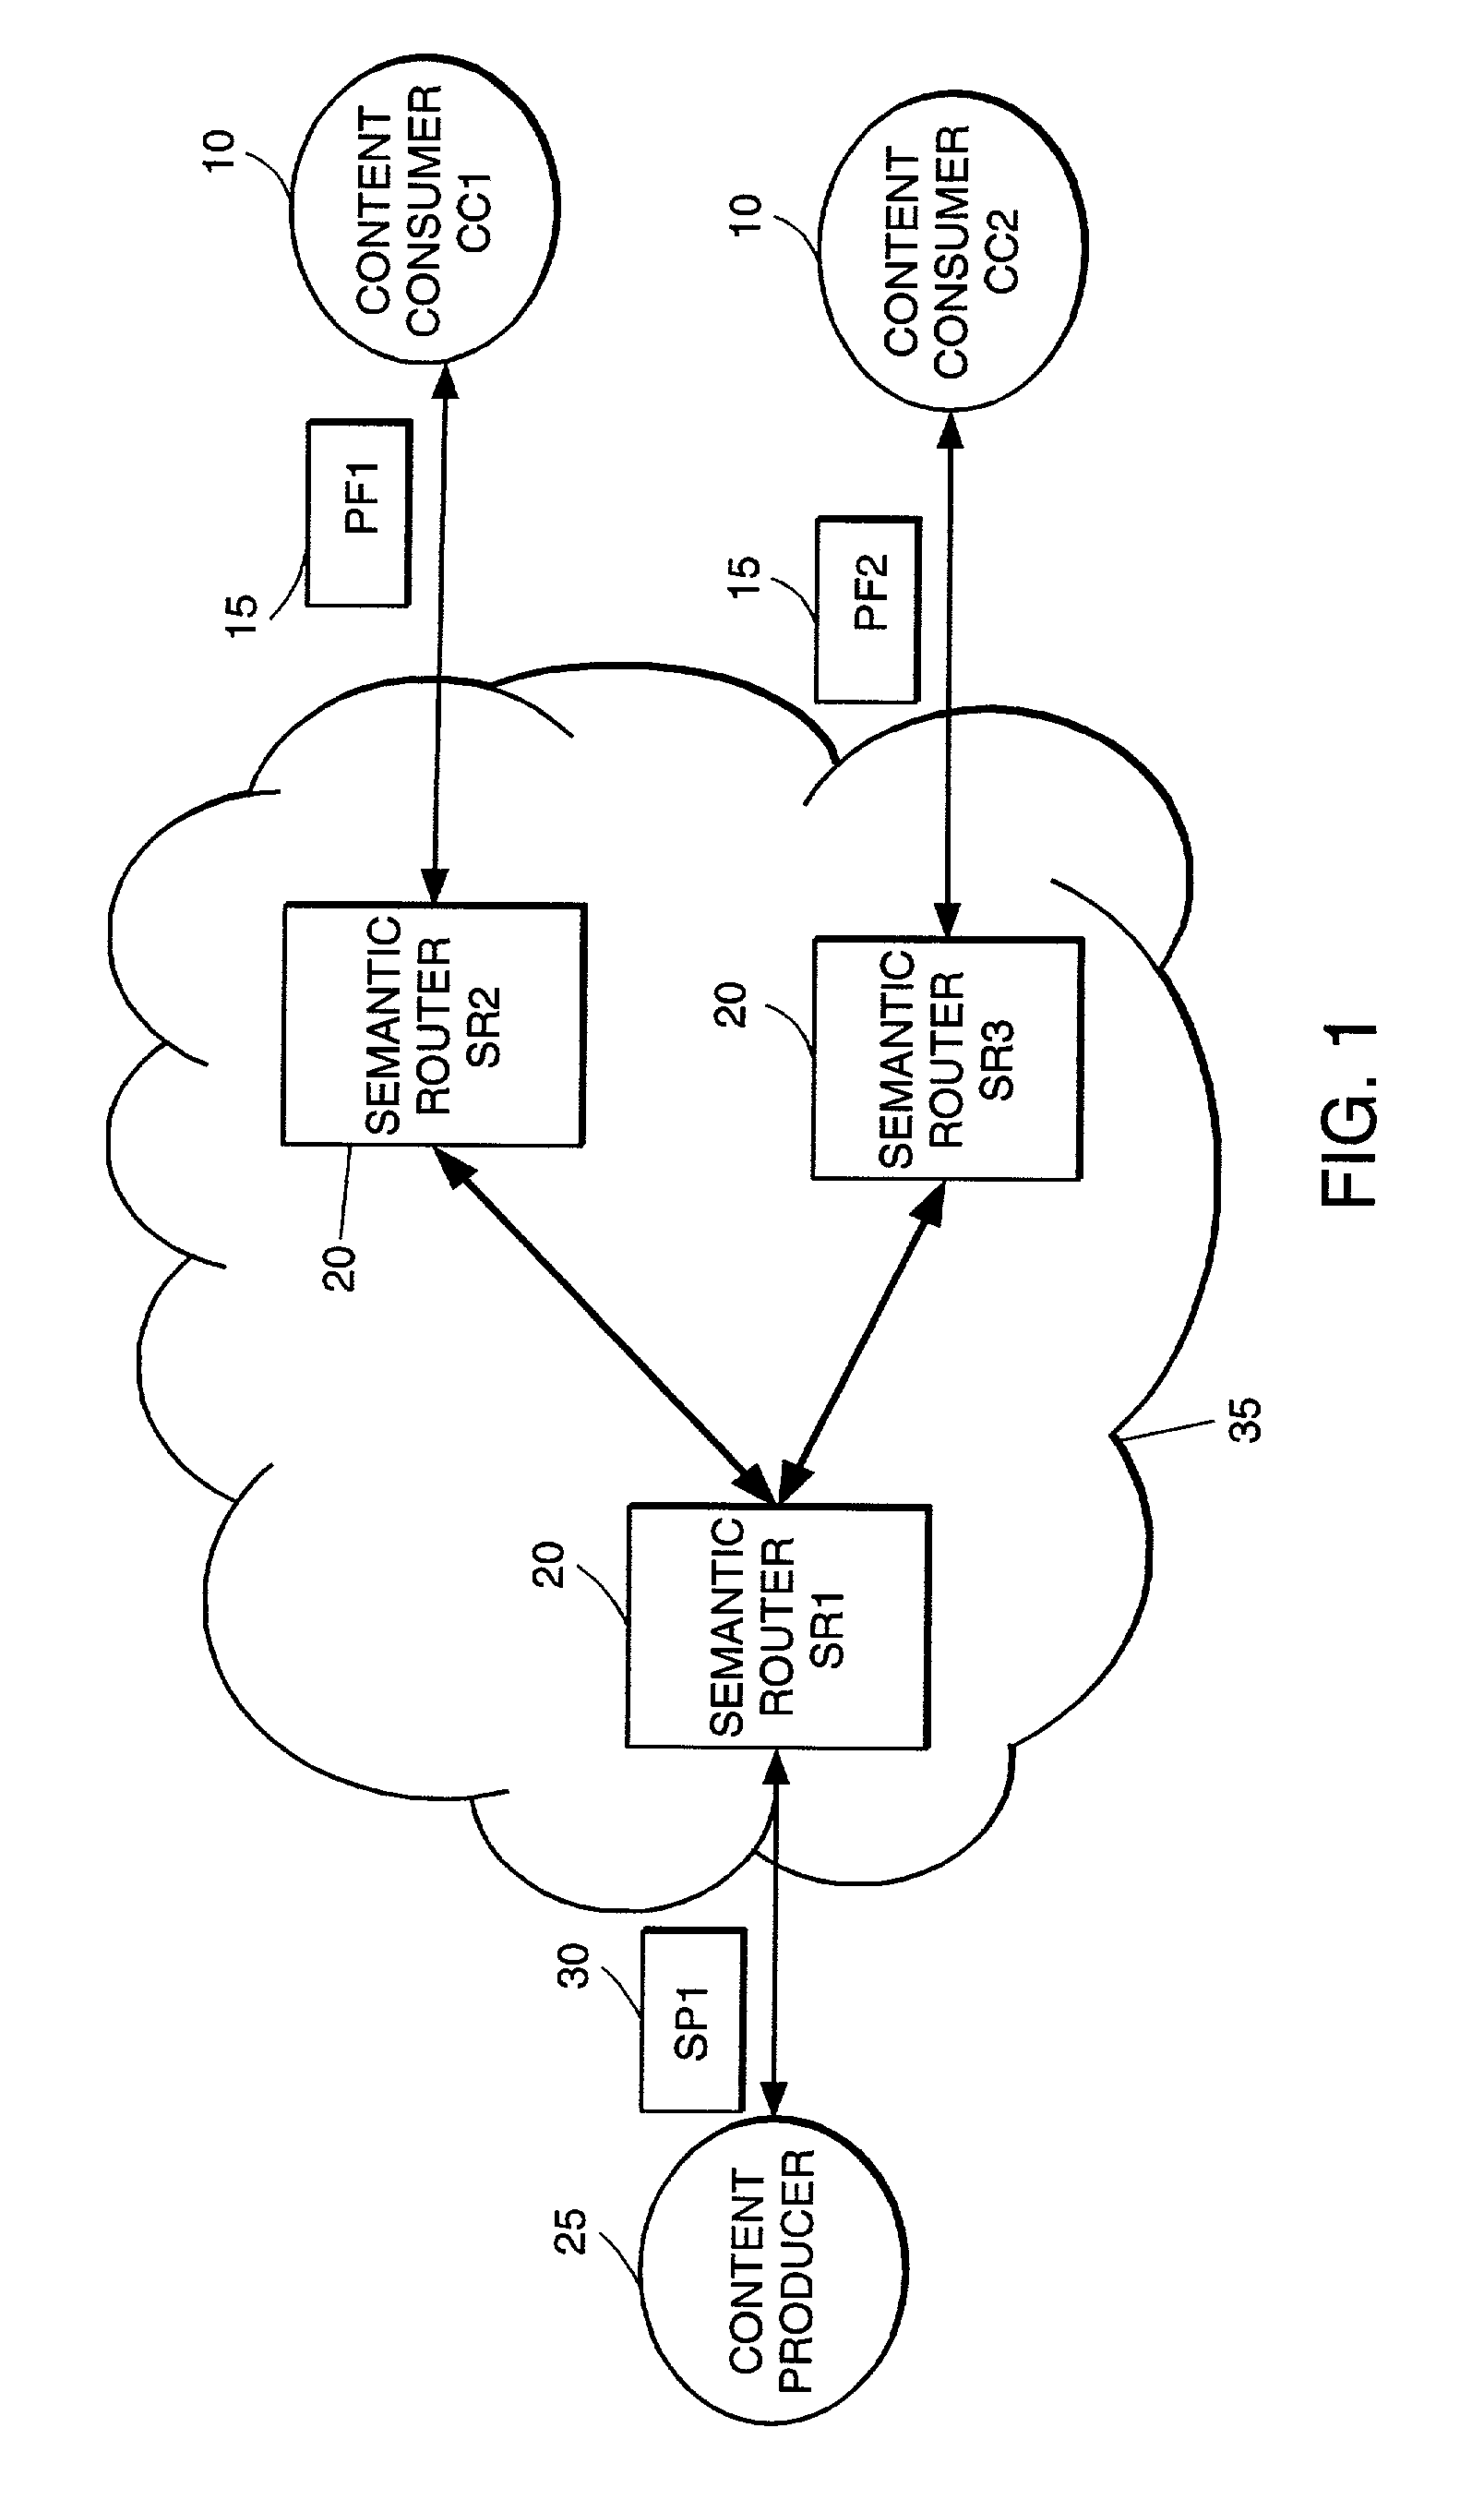 High-performance addressing and routing of data packets with semantically descriptive labels in a computer network